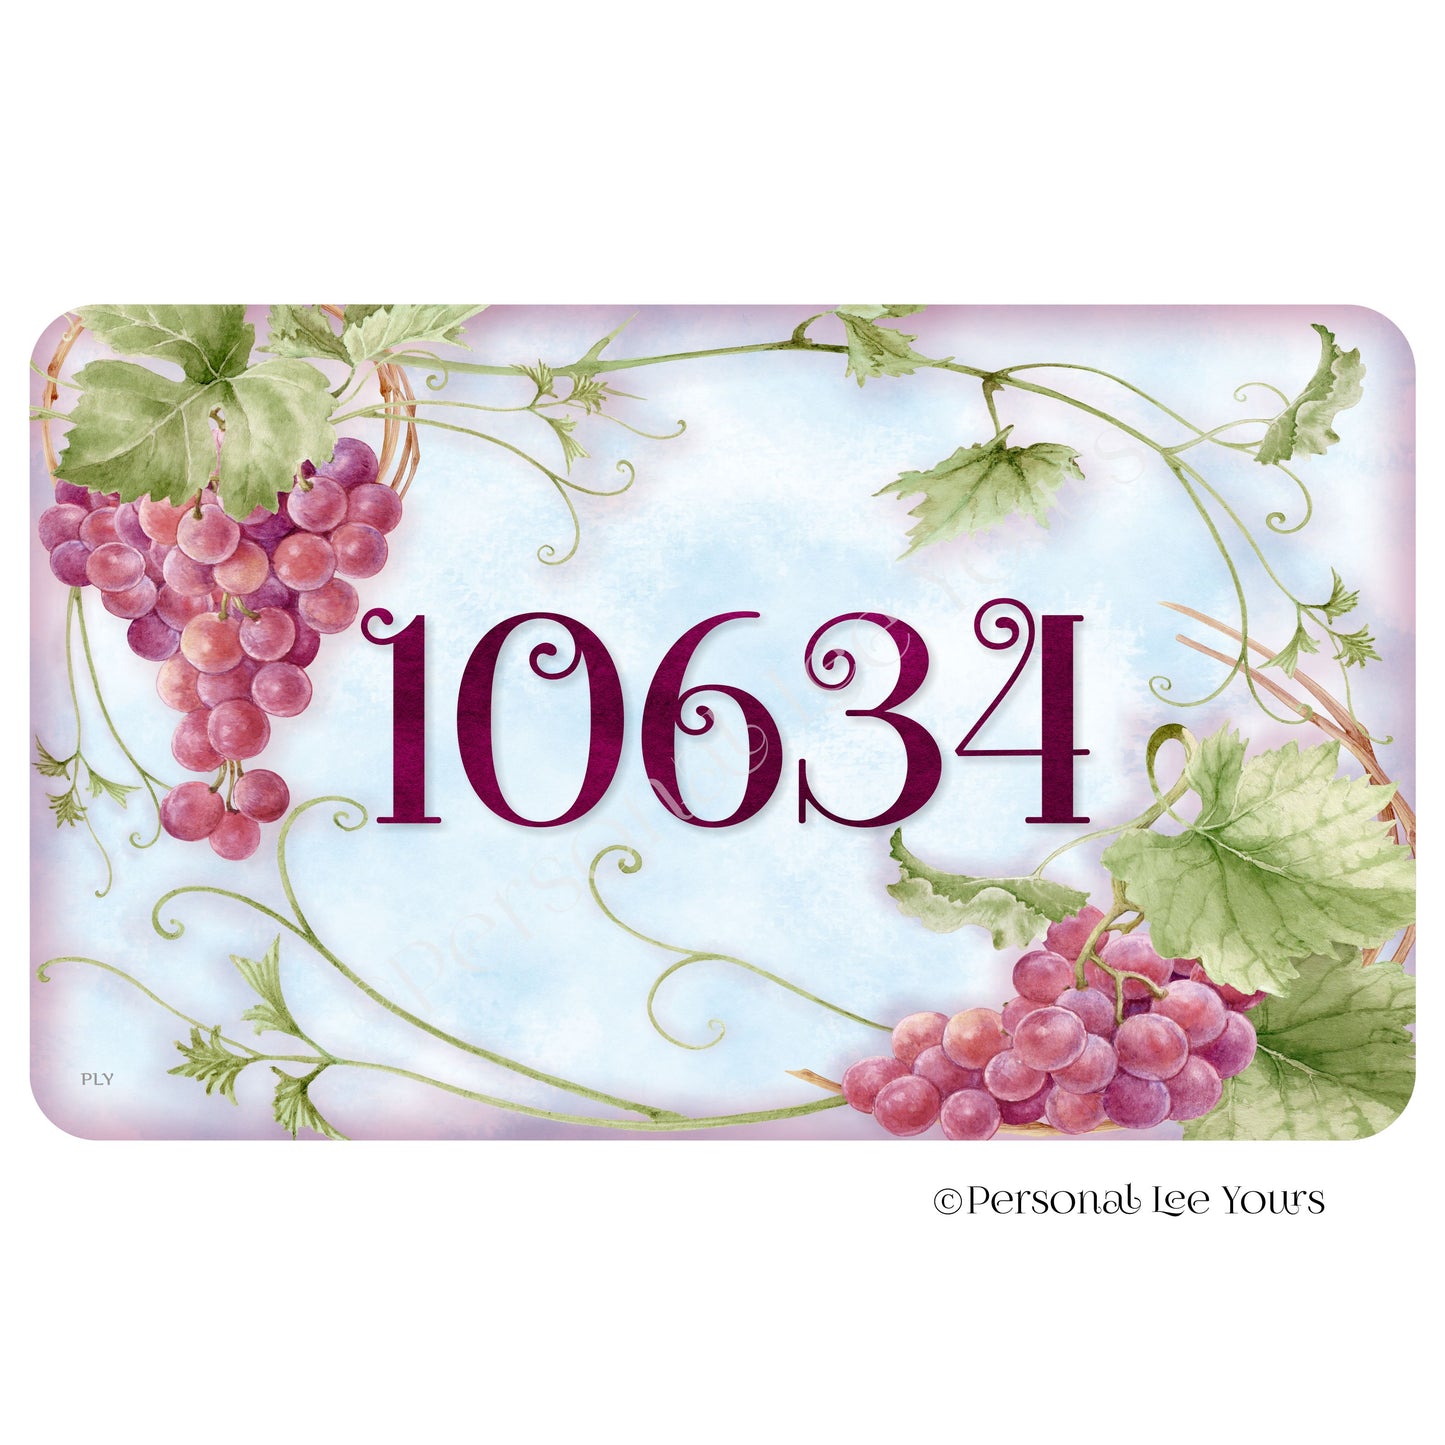 Personalized Wreath Sign * Grapevine * Your House Number * Horizontal * Lightweight Metal